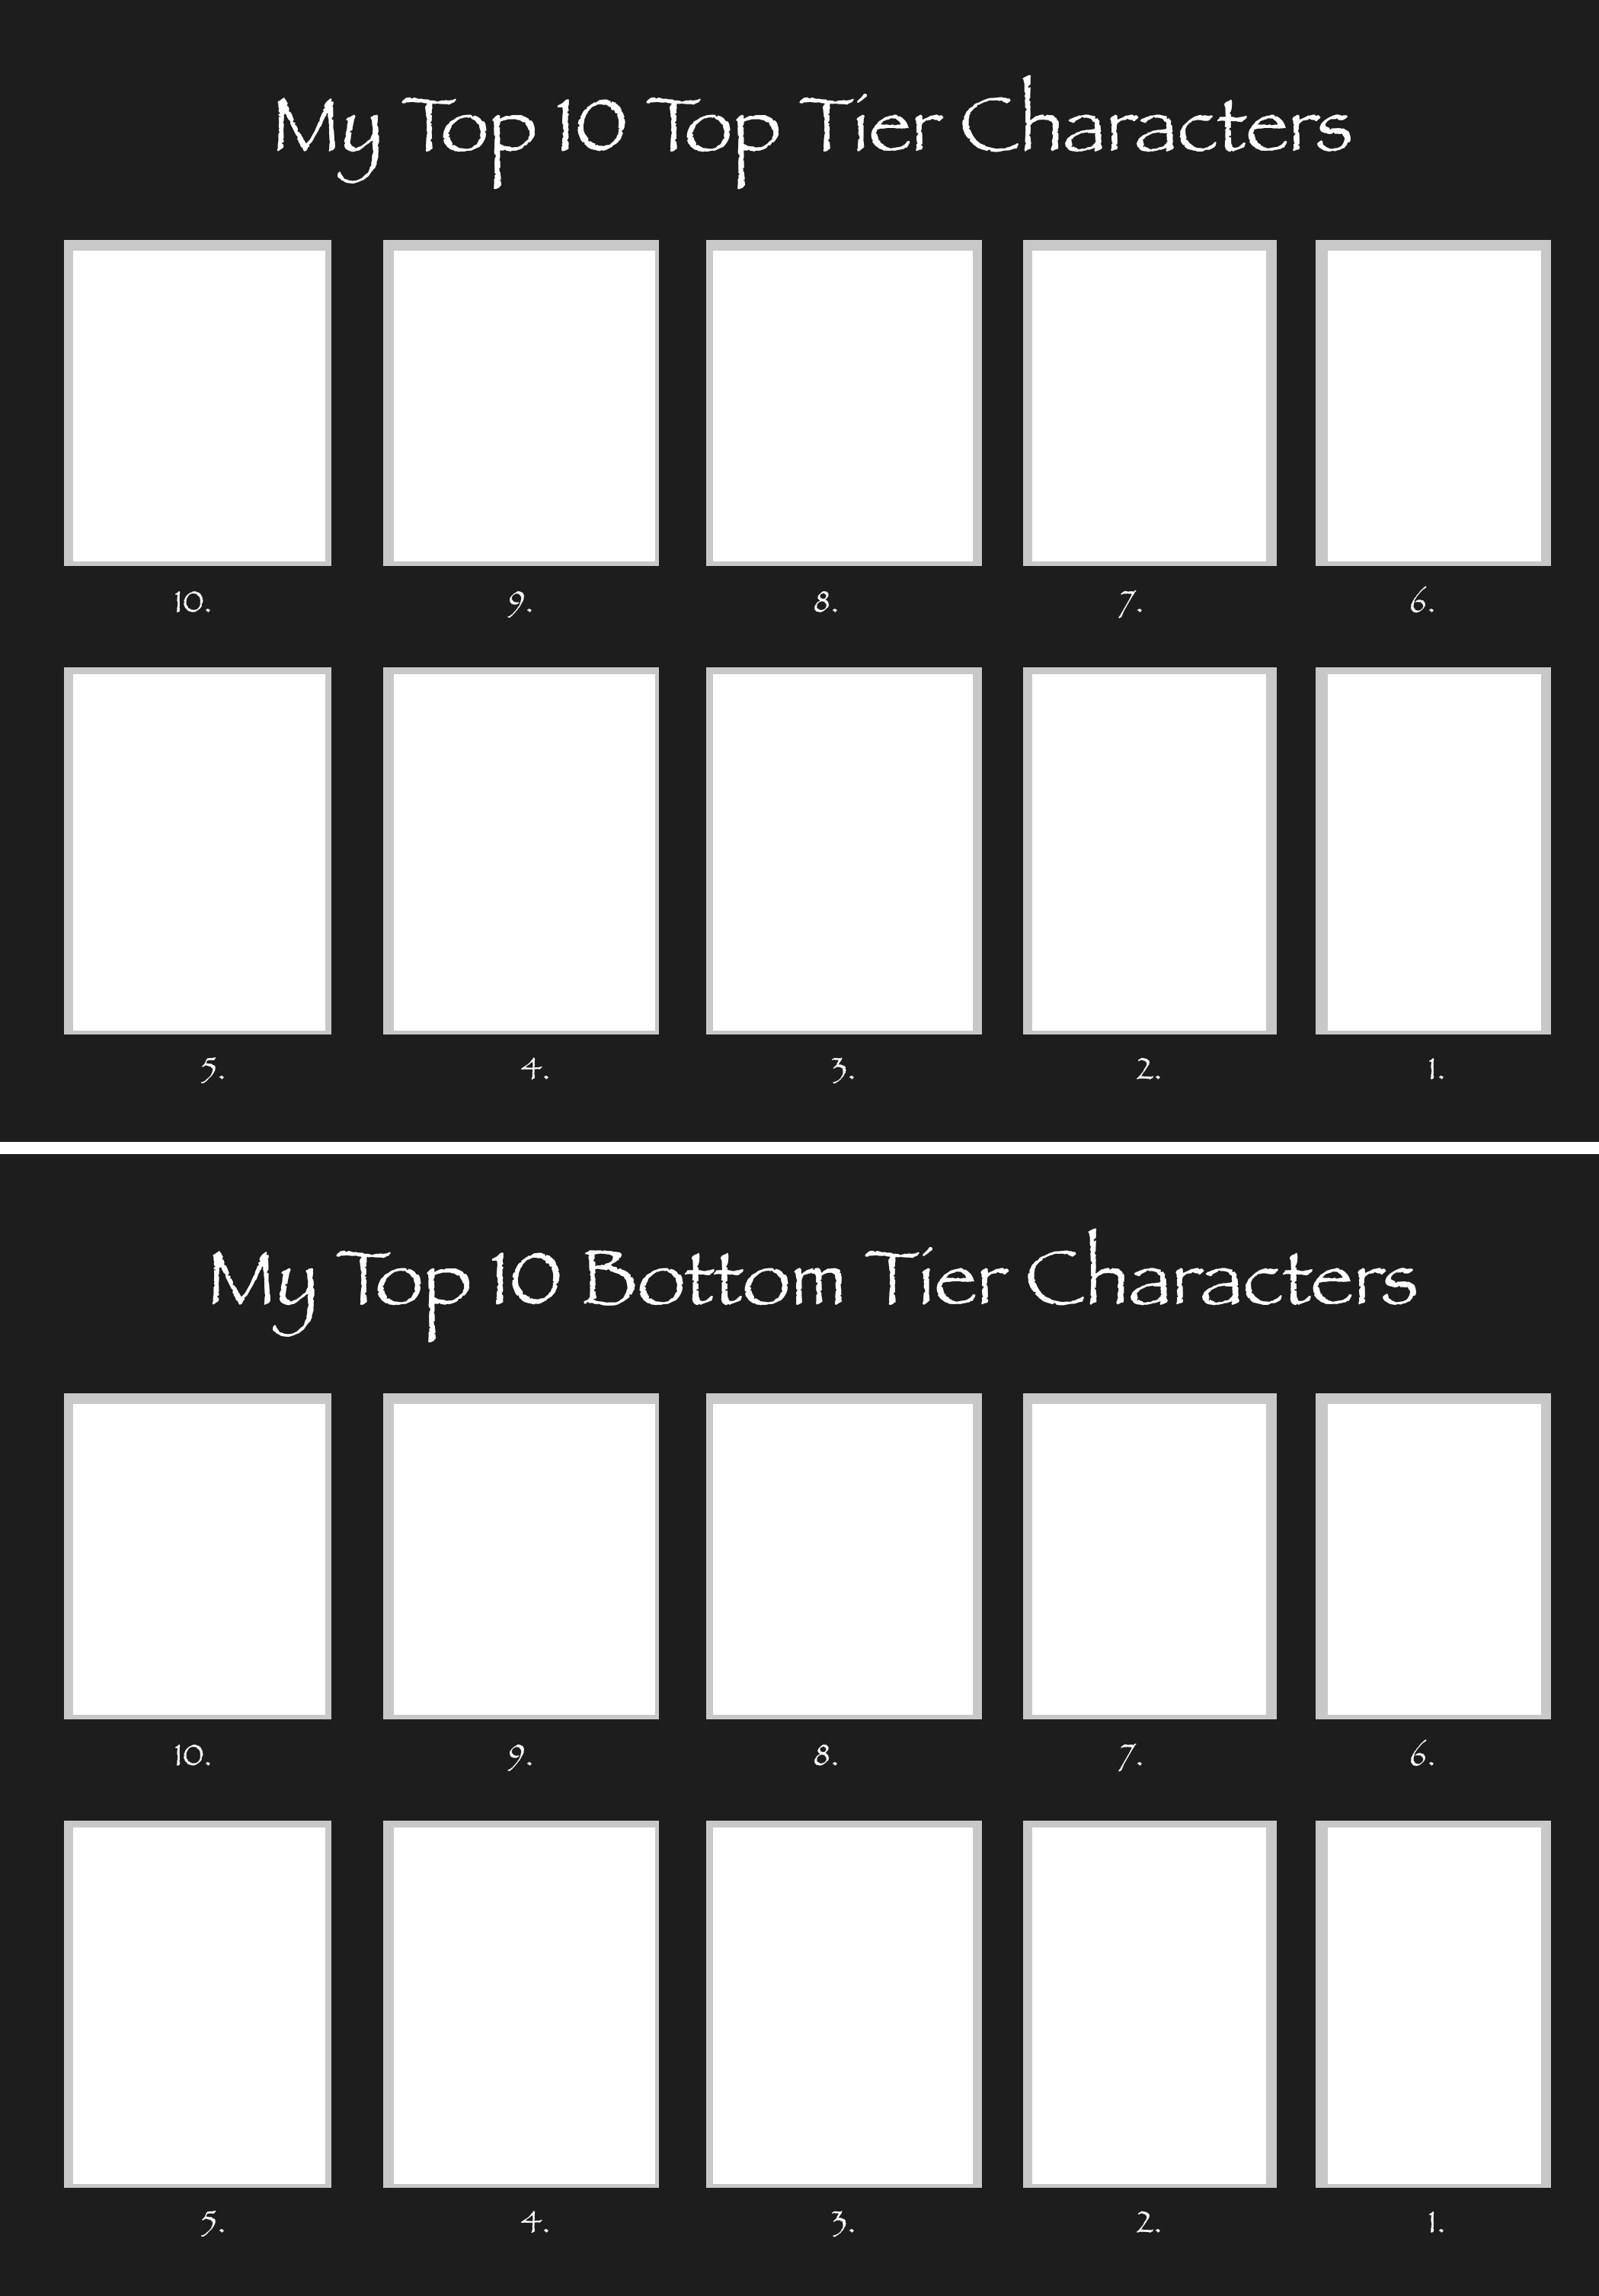 Syd Mose Glamour Top 10 Character Tier List Template by Mustache-Twirler on DeviantArt